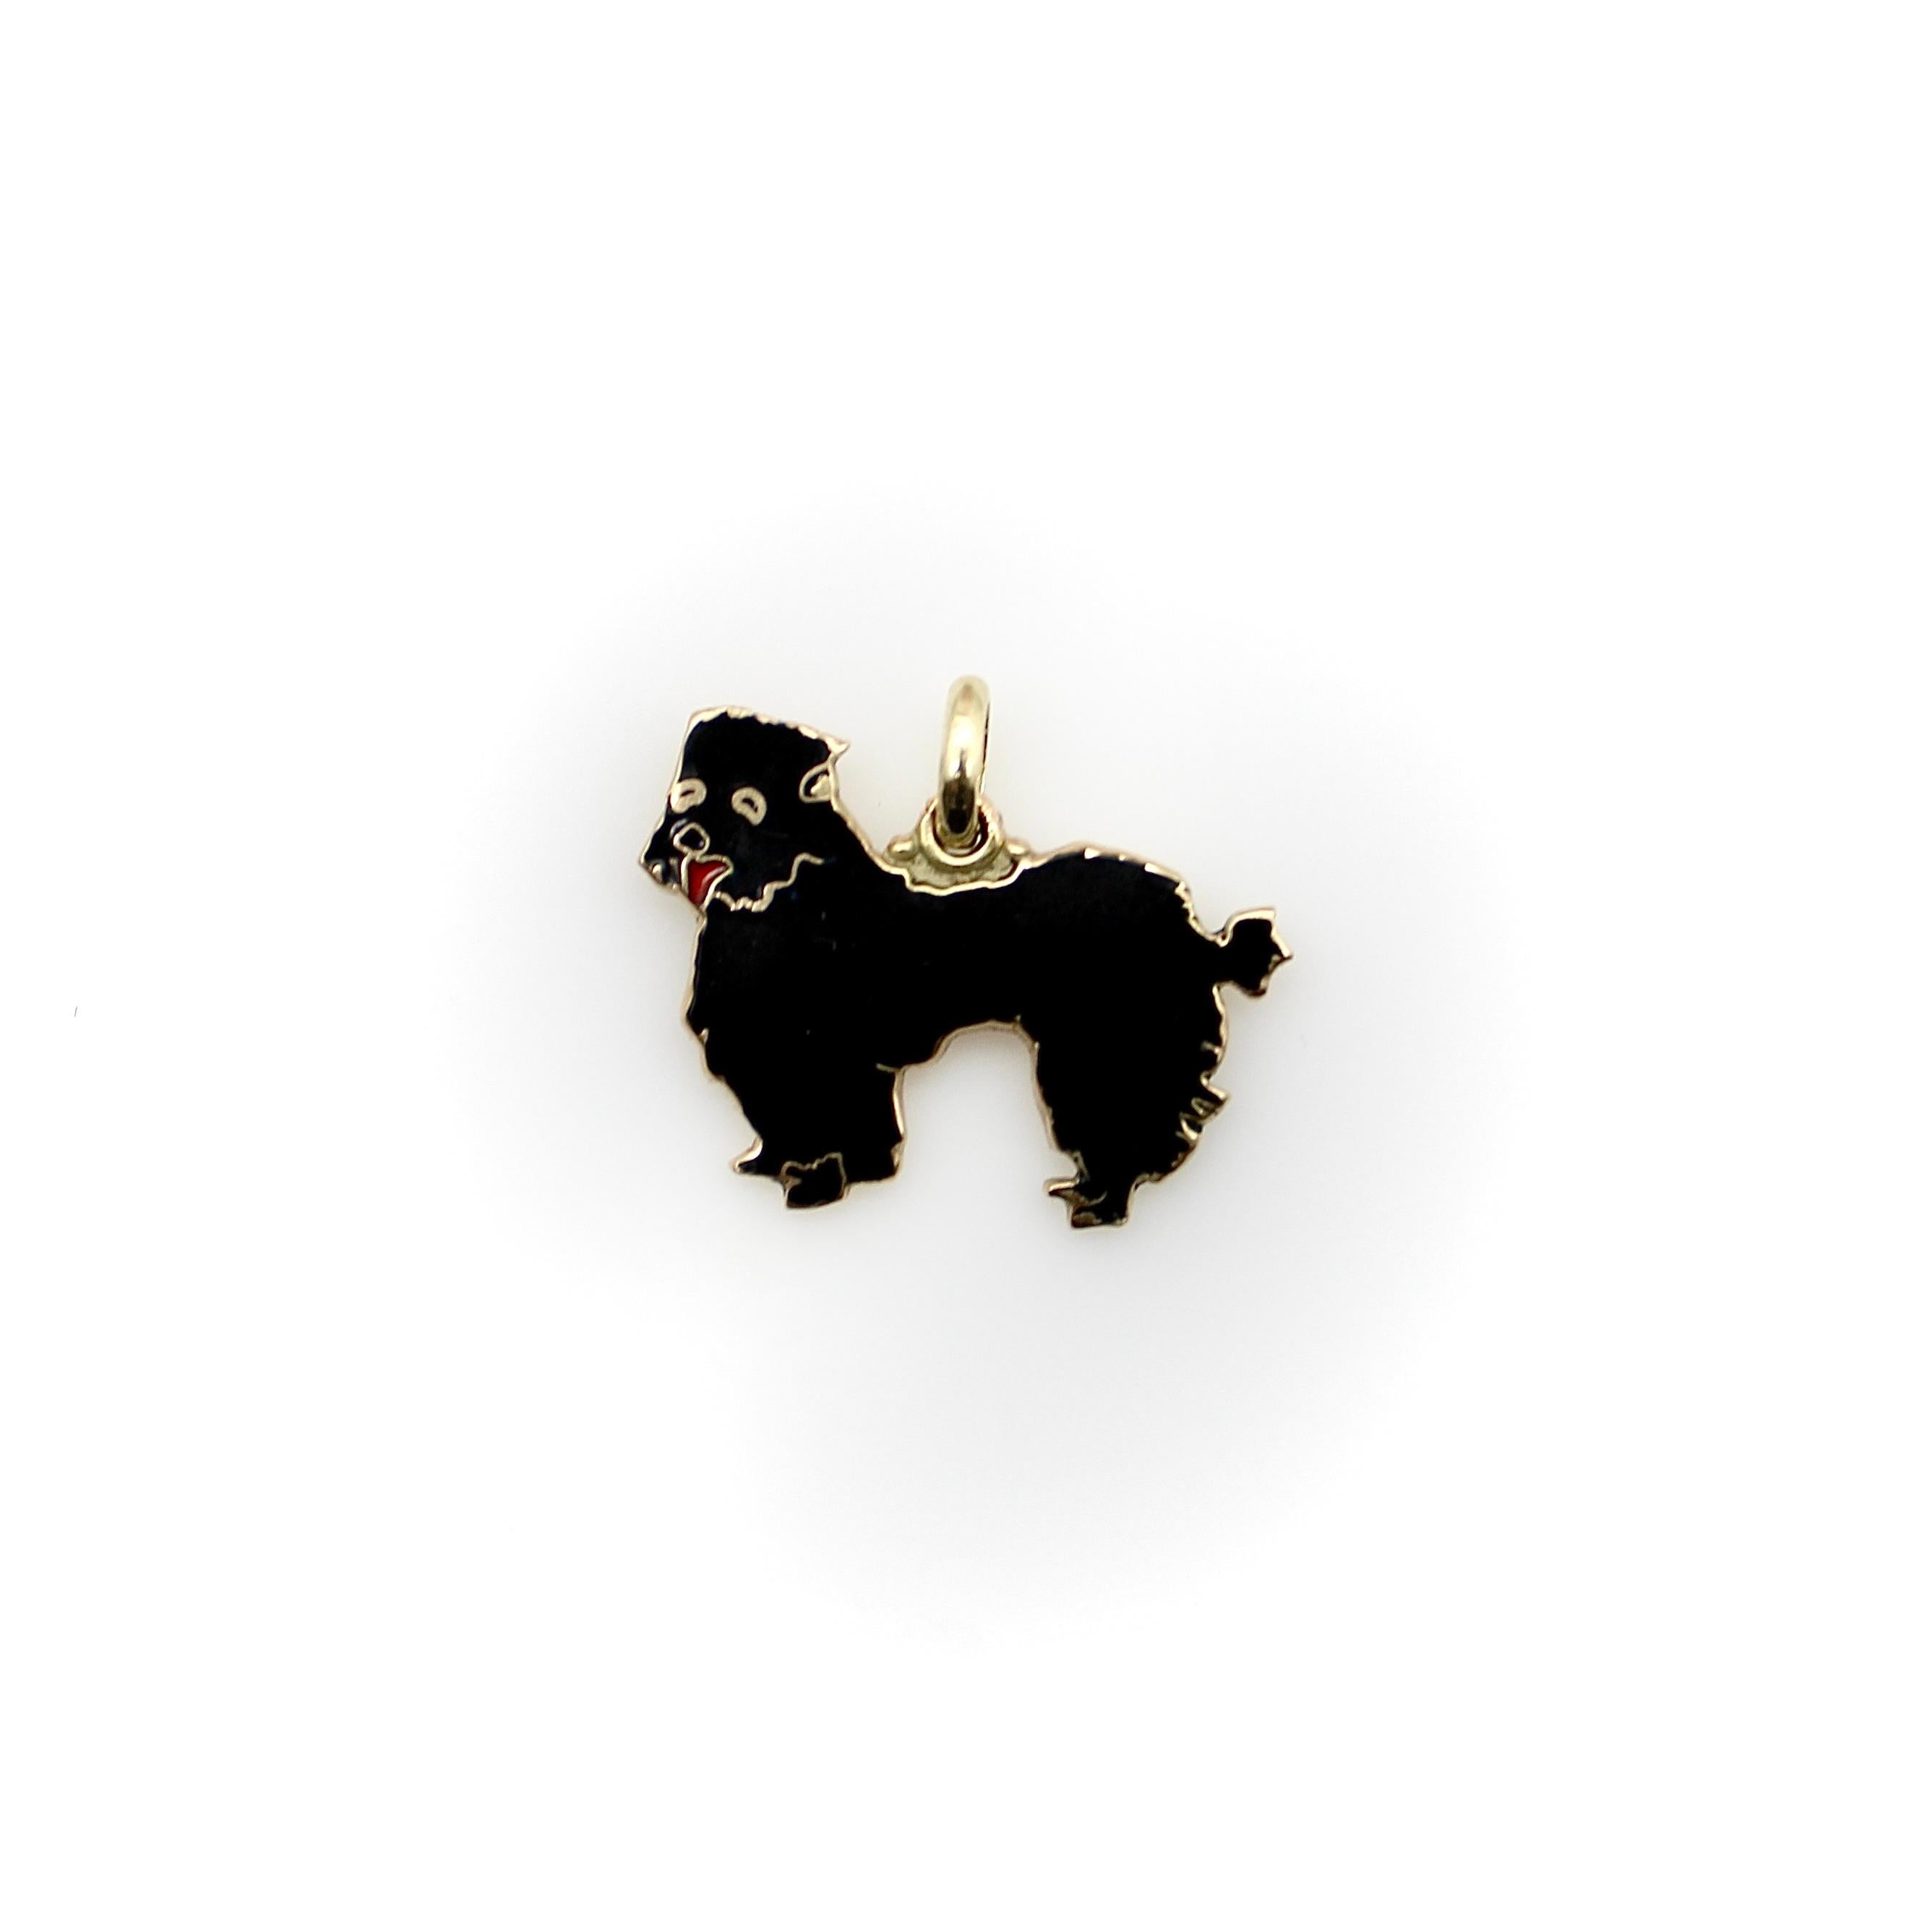 Made in 14k gold with enamel details, the poodle in this charm has a fluffy outline of black hair, and the red highlight for its panting tongue gives the dog a cute facial expression. Circa the 1960’s, the adorable dogs in these charms captured our